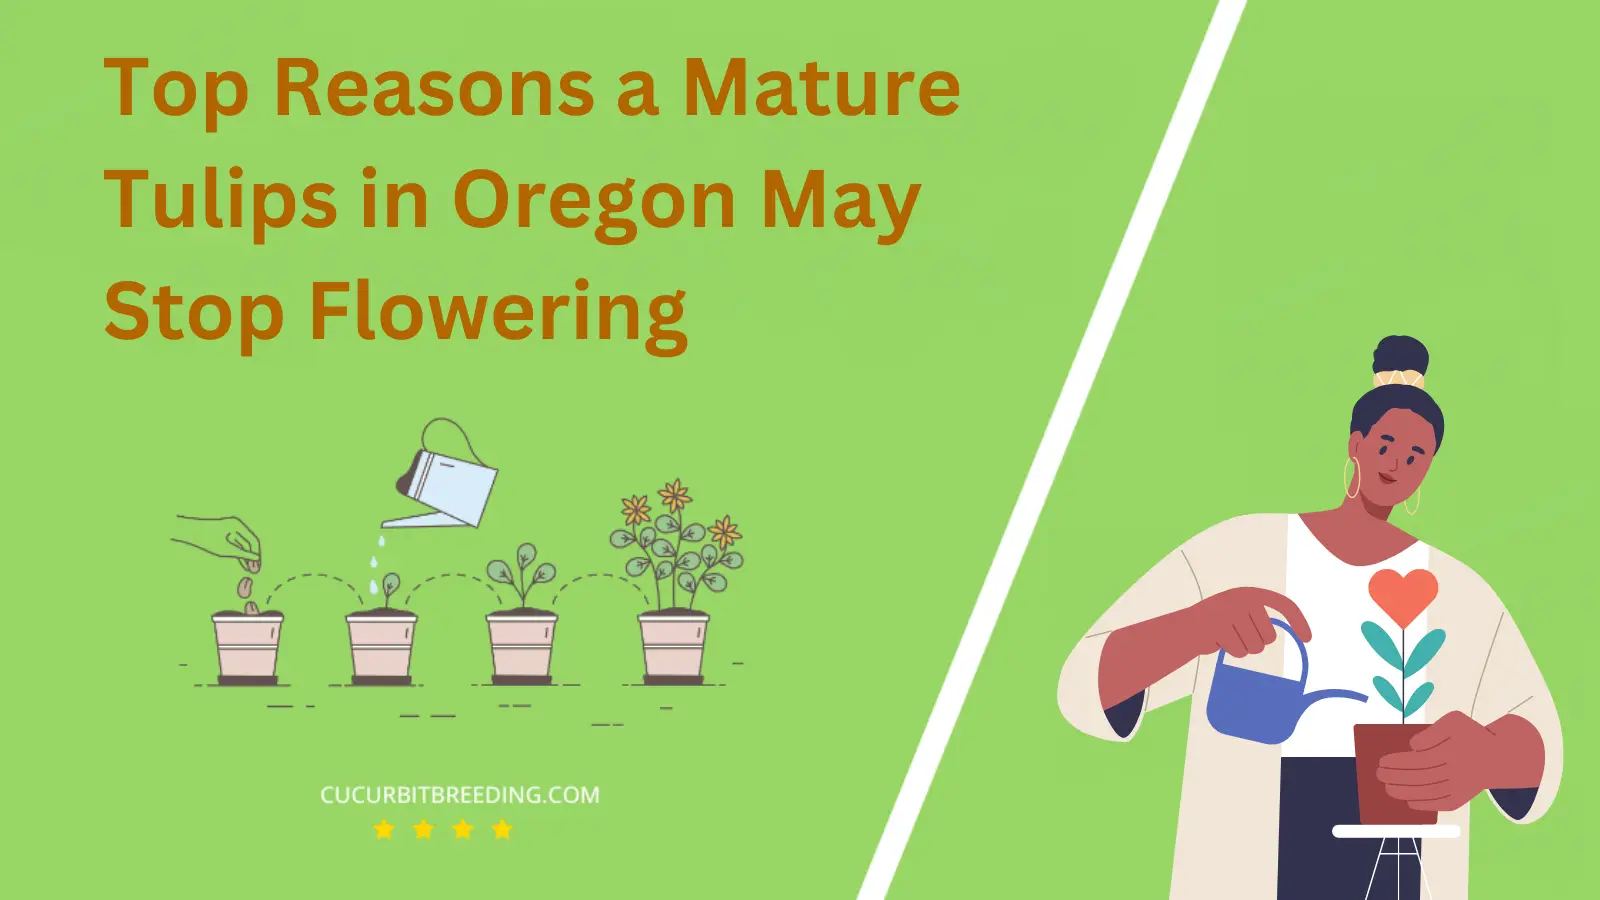 Top Reasons a Mature Tulips in Oregon May Stop Flowering